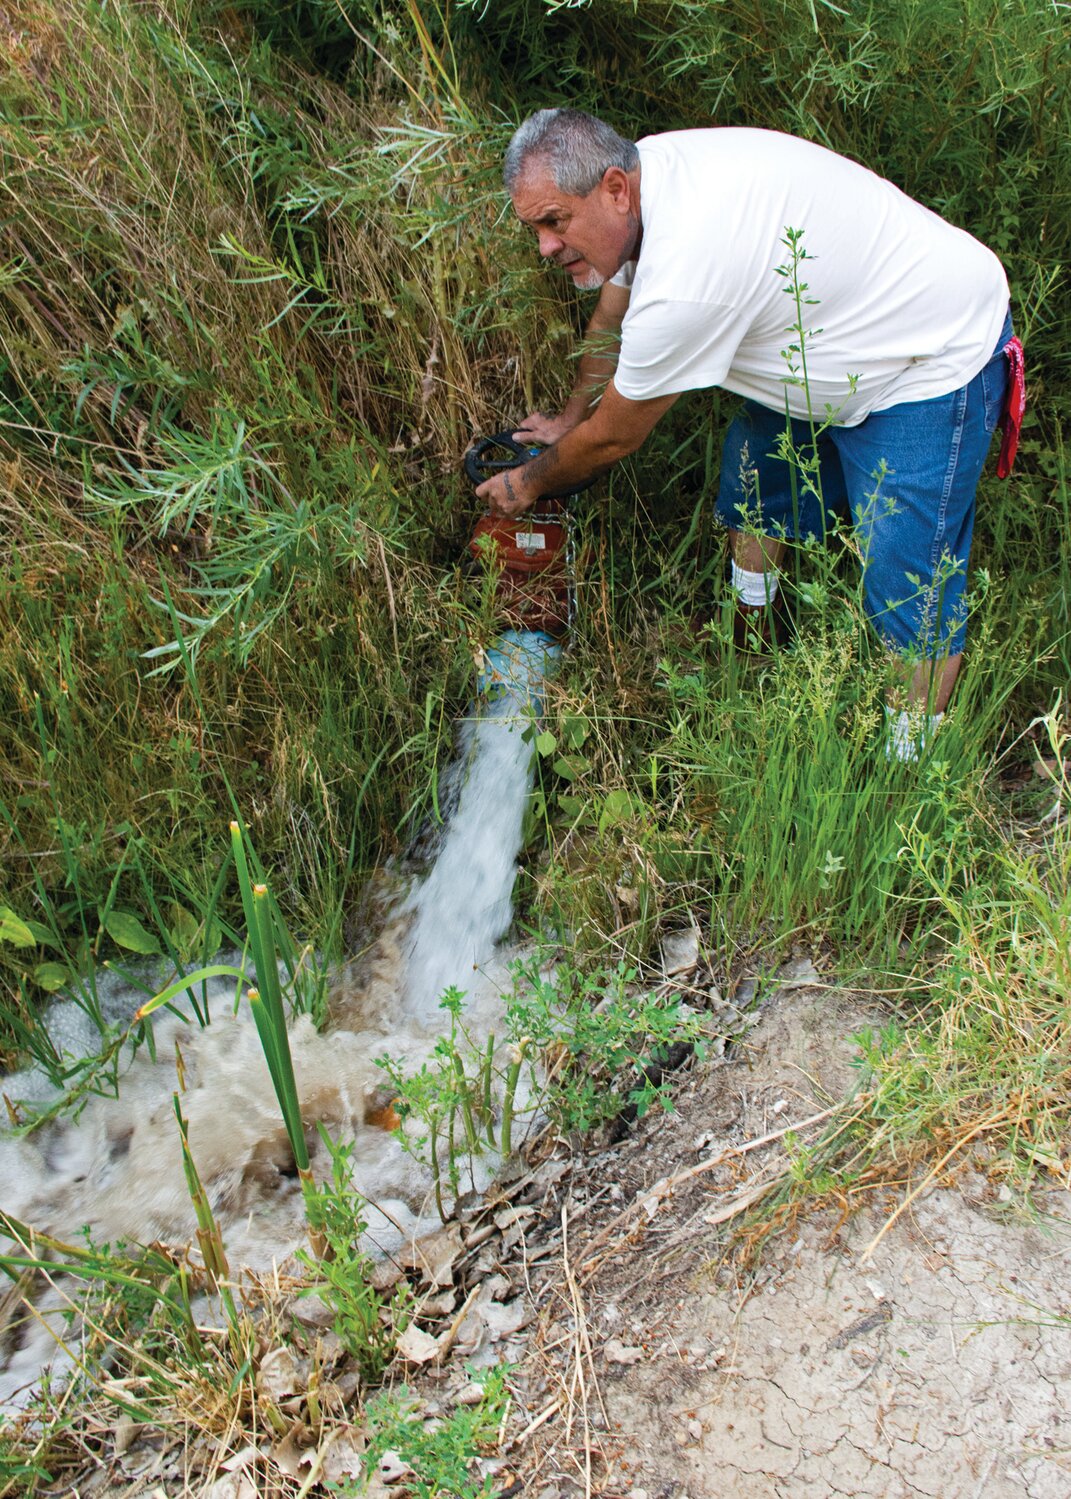 Mayordomo Harvey Vigil of Las Acequias de Placitas monitors the flow of irrigation water coming for Ciruela tank and springs on a separate ditch that meet here.